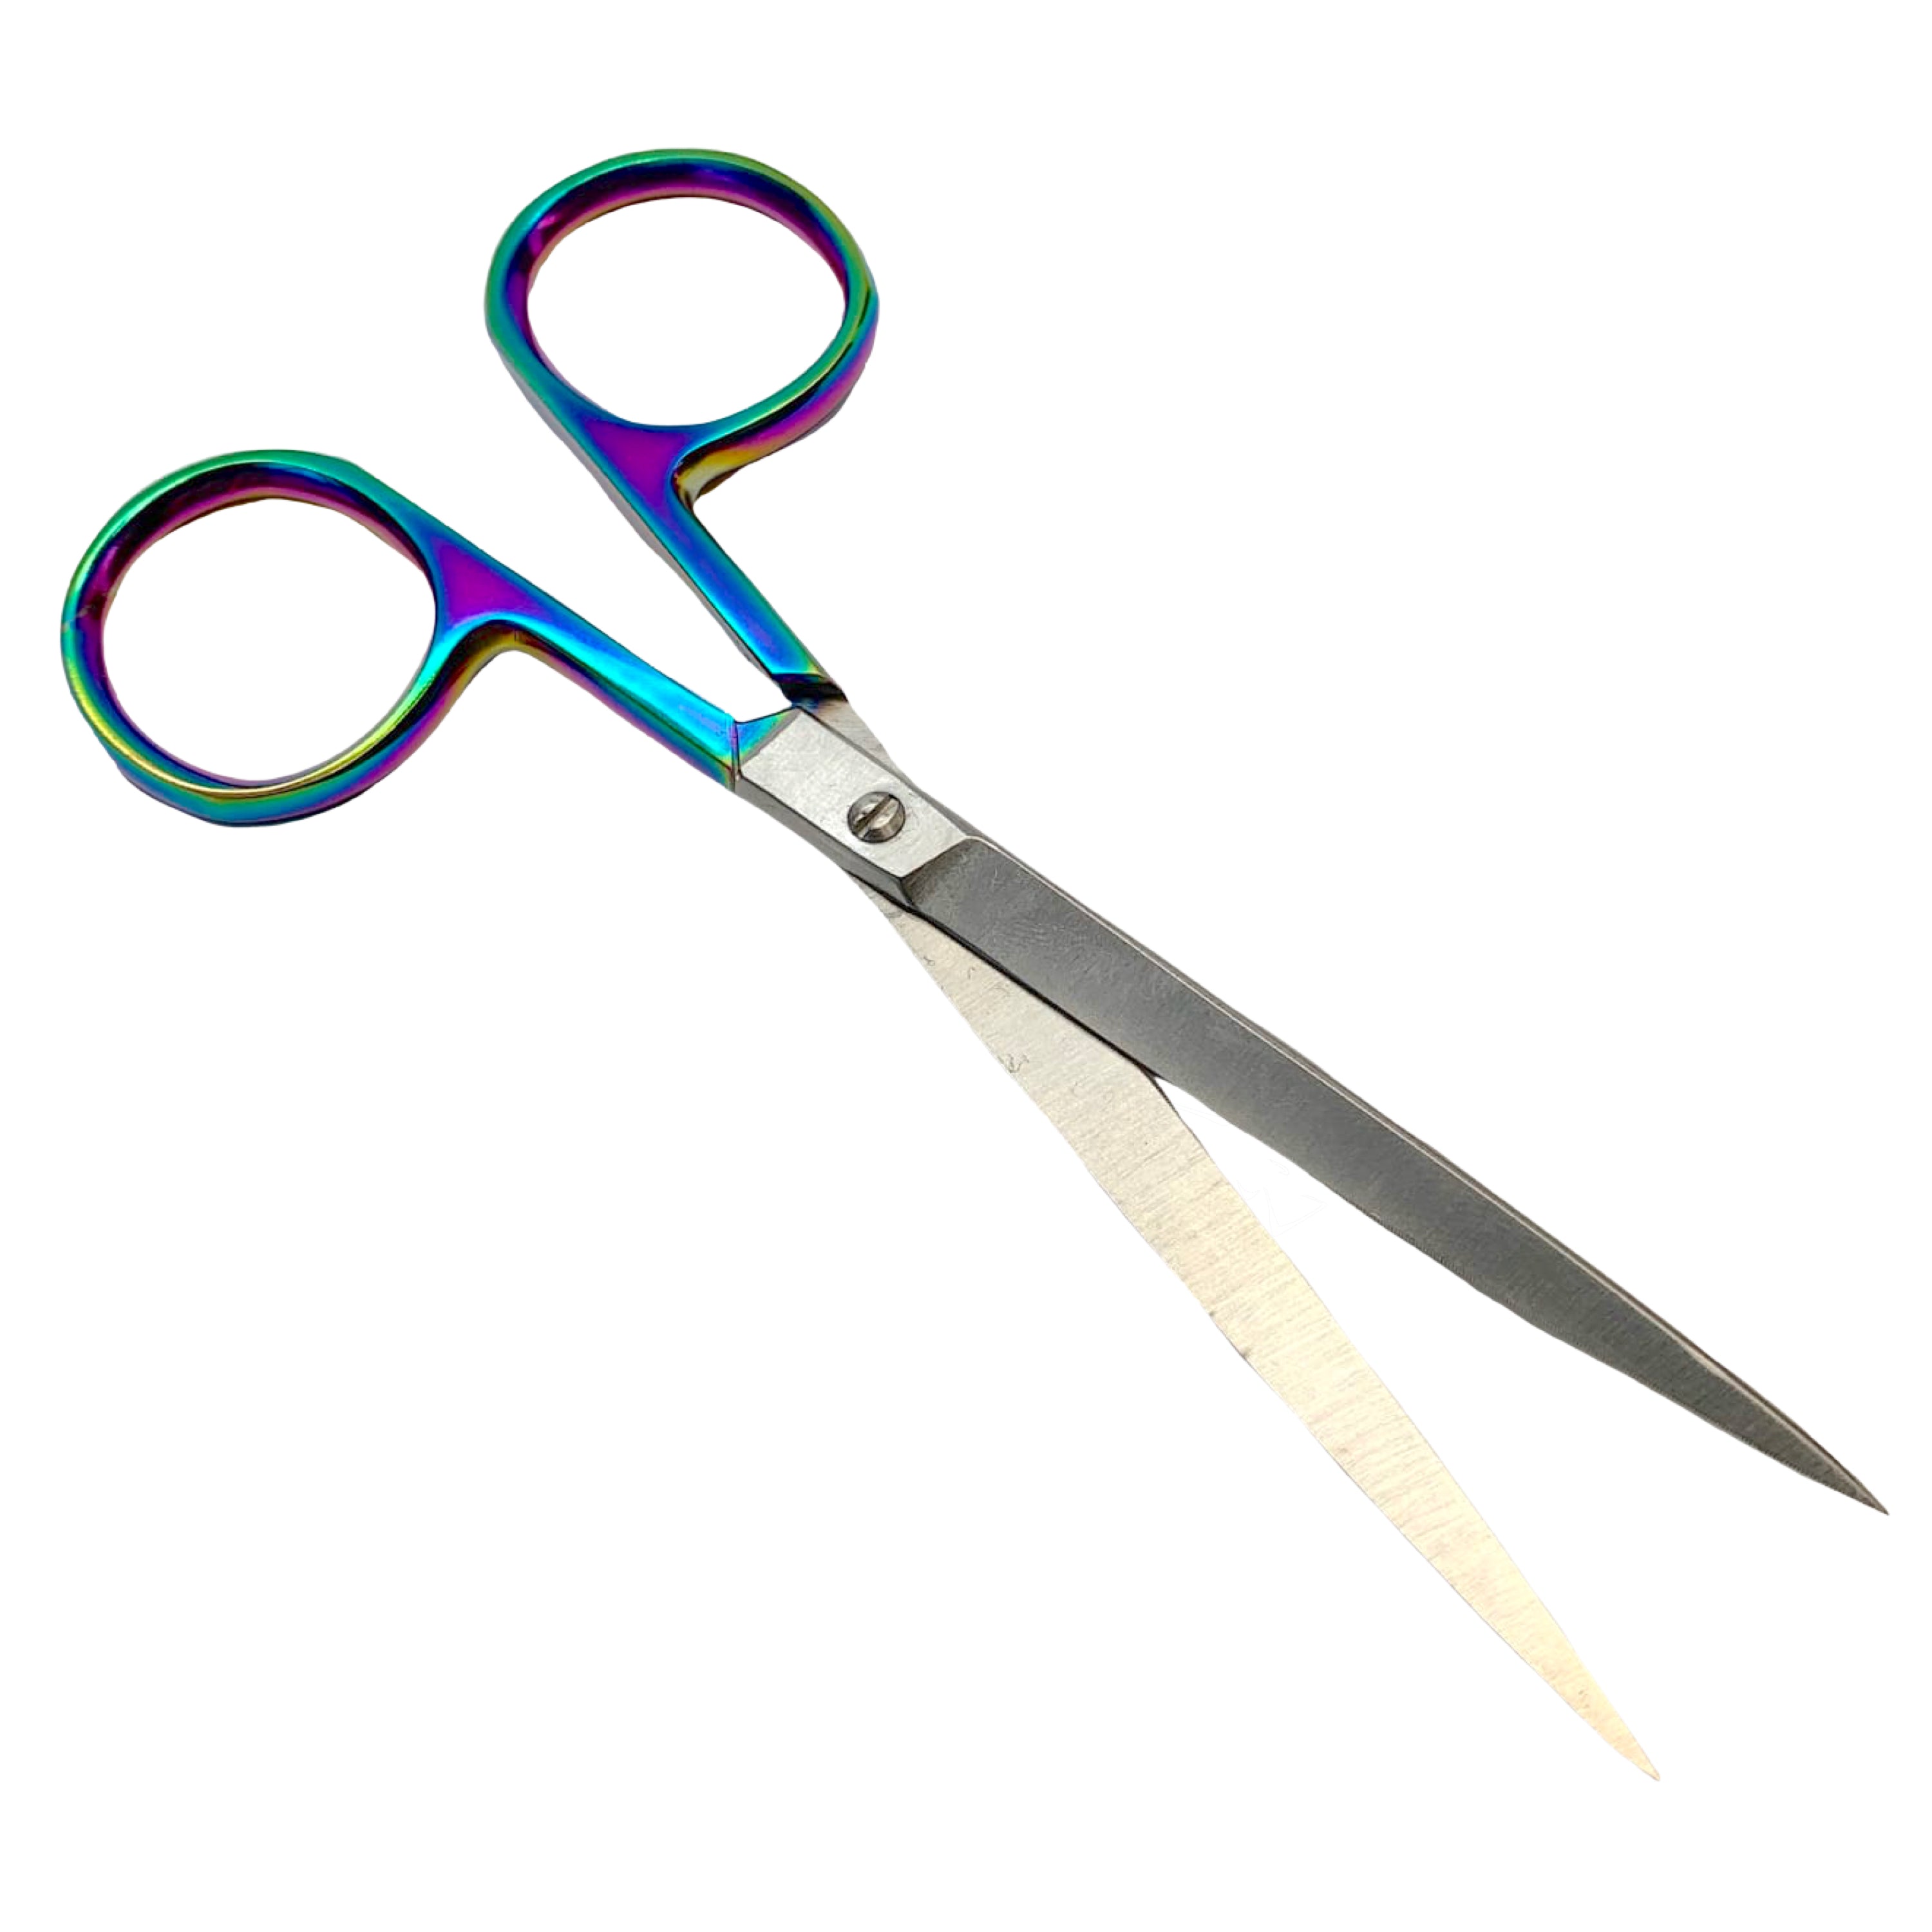 fly scissors fishing, fly scissors fishing Suppliers and Manufacturers at